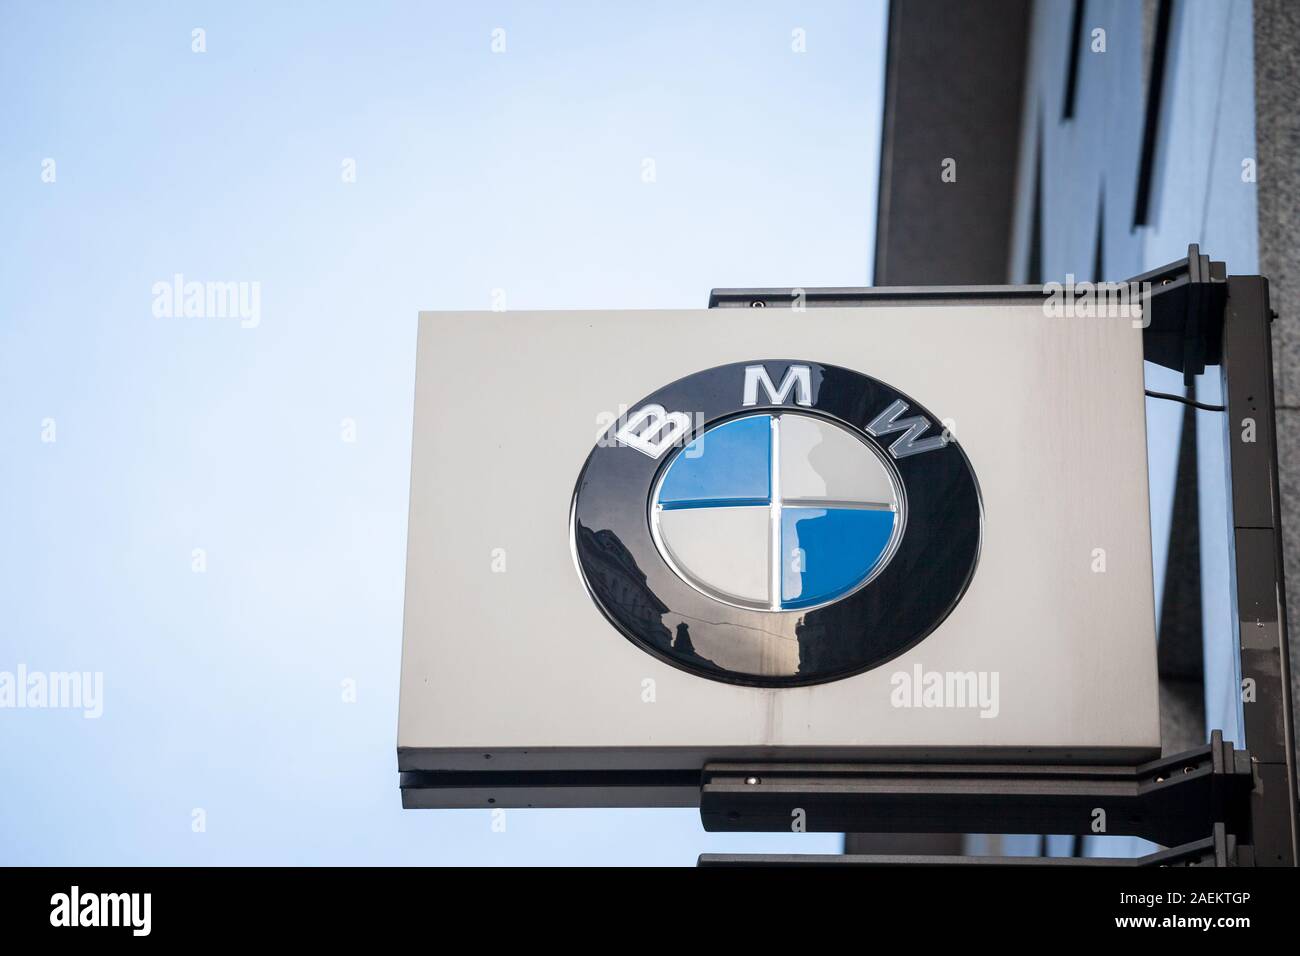 VIENNA, AUSTRIA - NOVEMBER 6, 2019: BMW logo on their main dealership store in Vienna. BMW is a German car and automotive manufacturer, specialized in Stock Photo